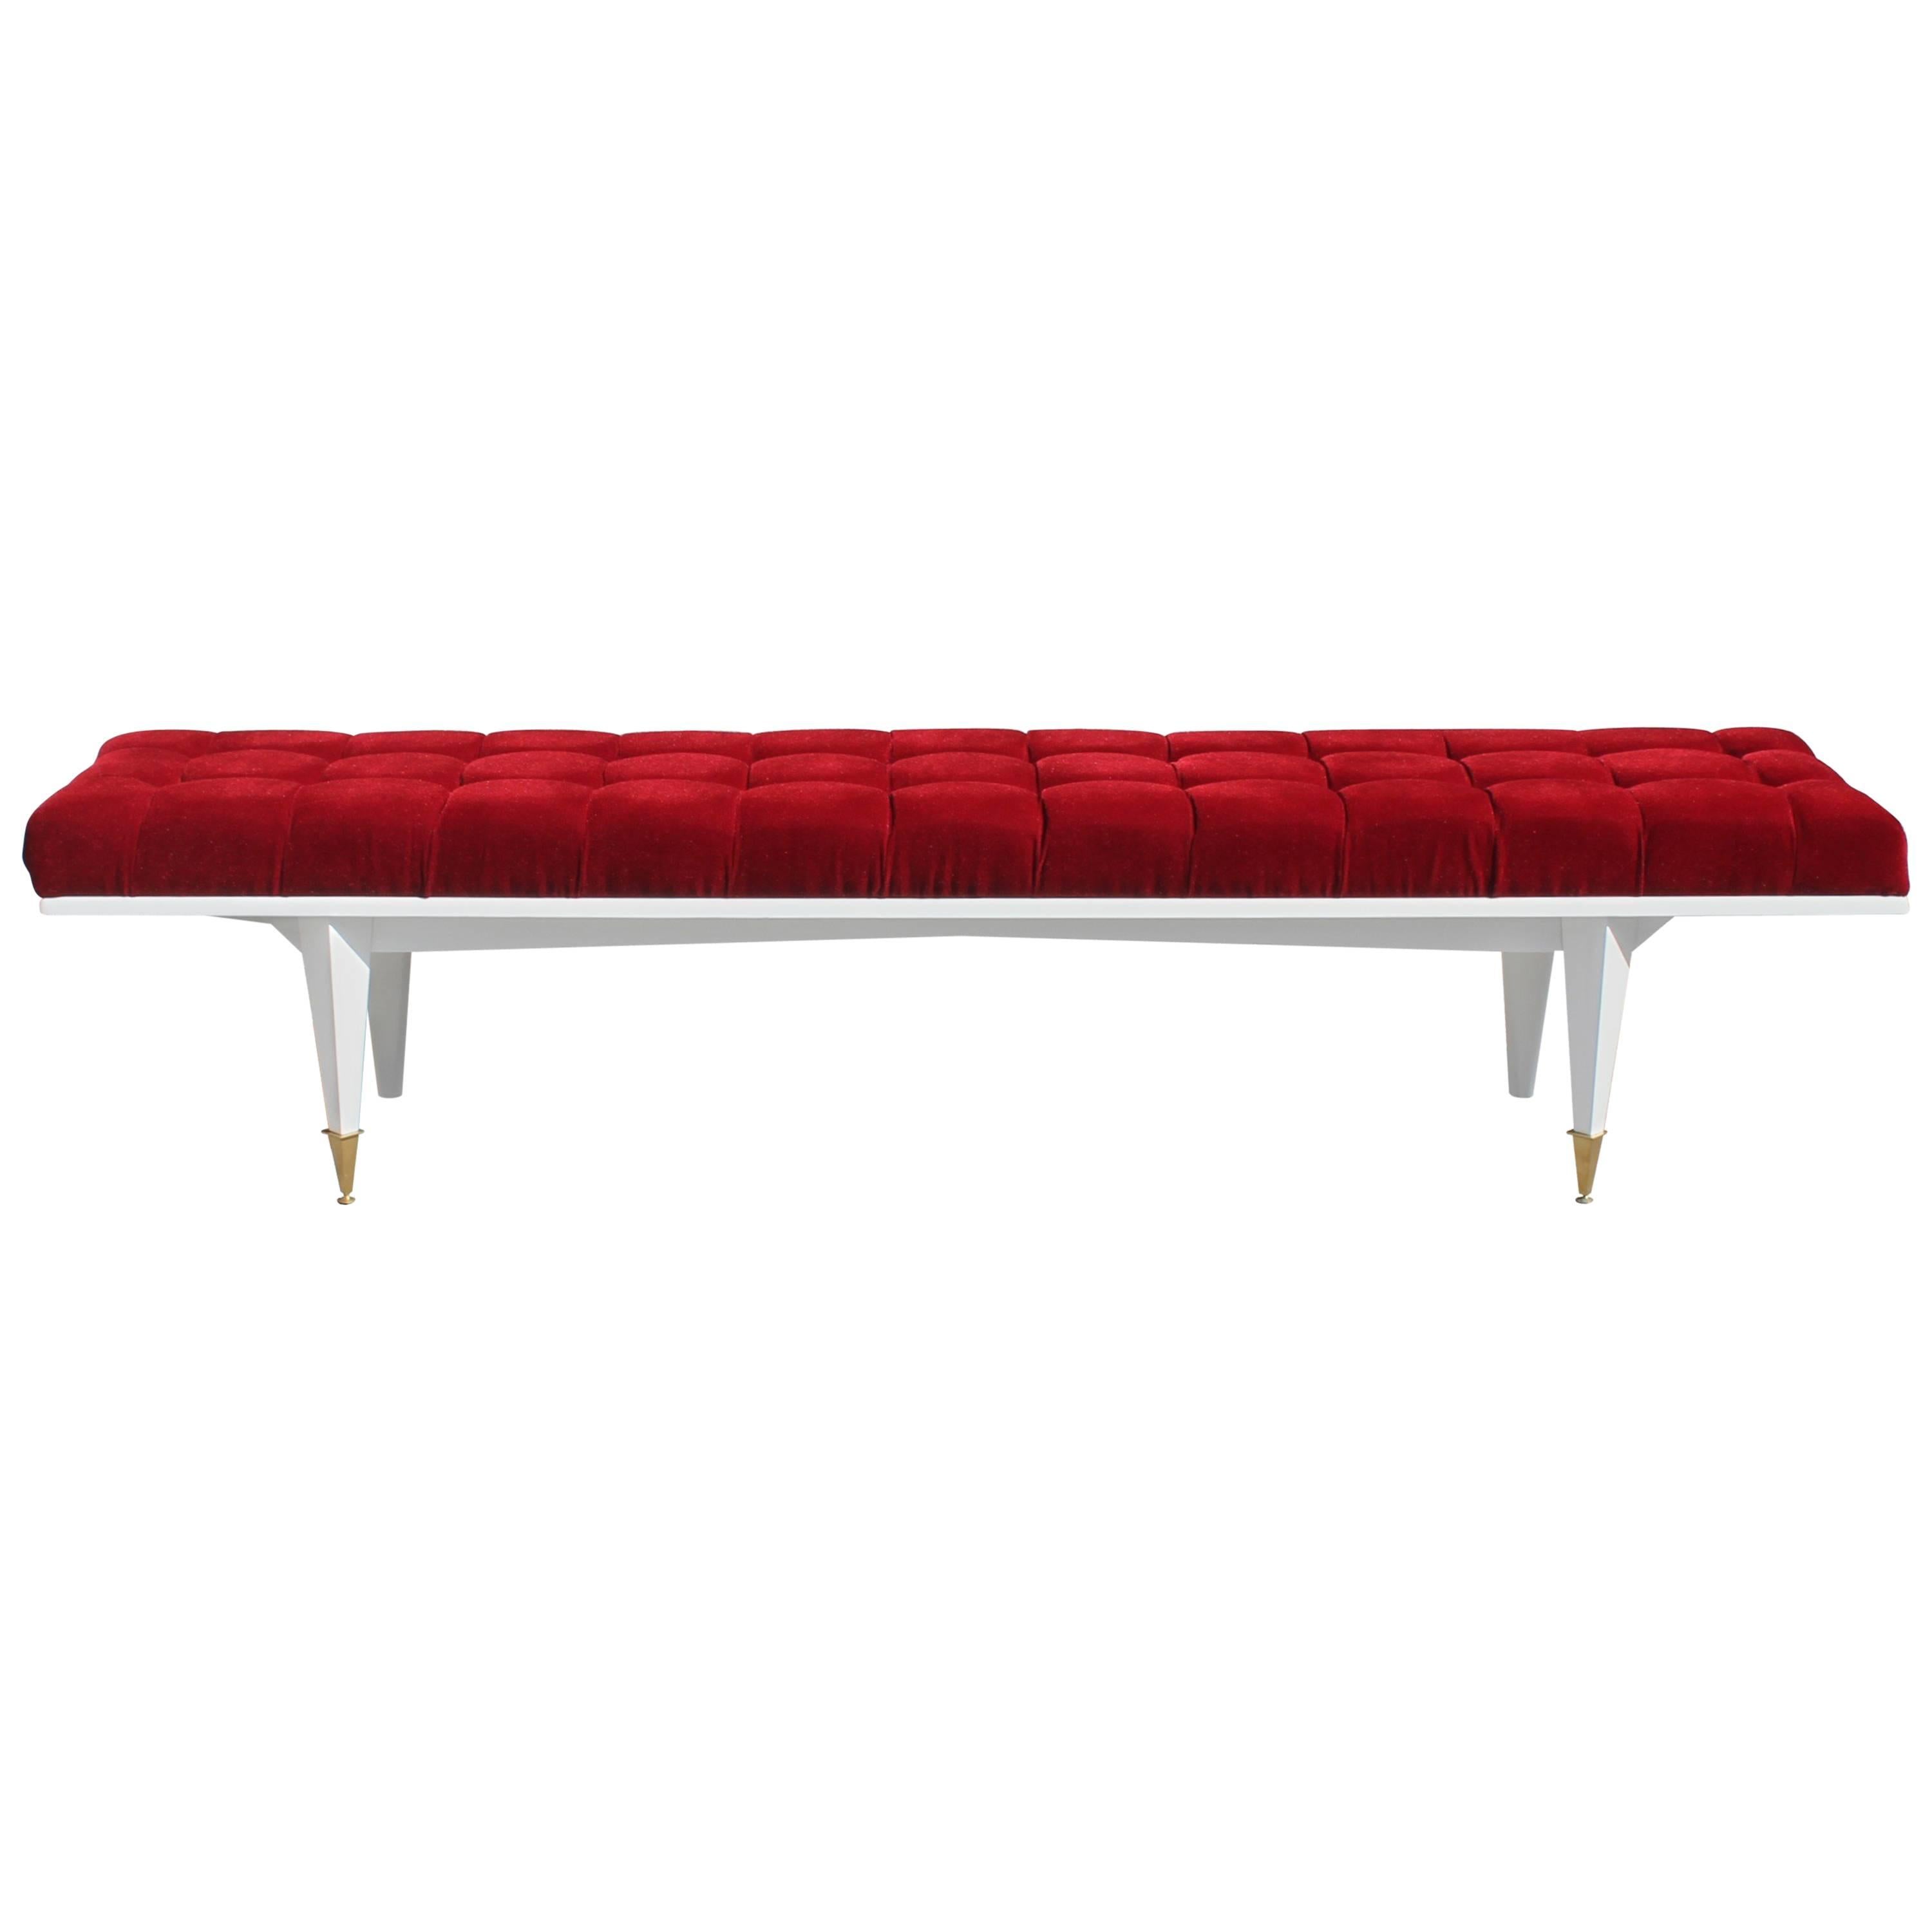 French Art Deco Snow White Lacquered Long Sitting Bench, circa 1940s For Sale